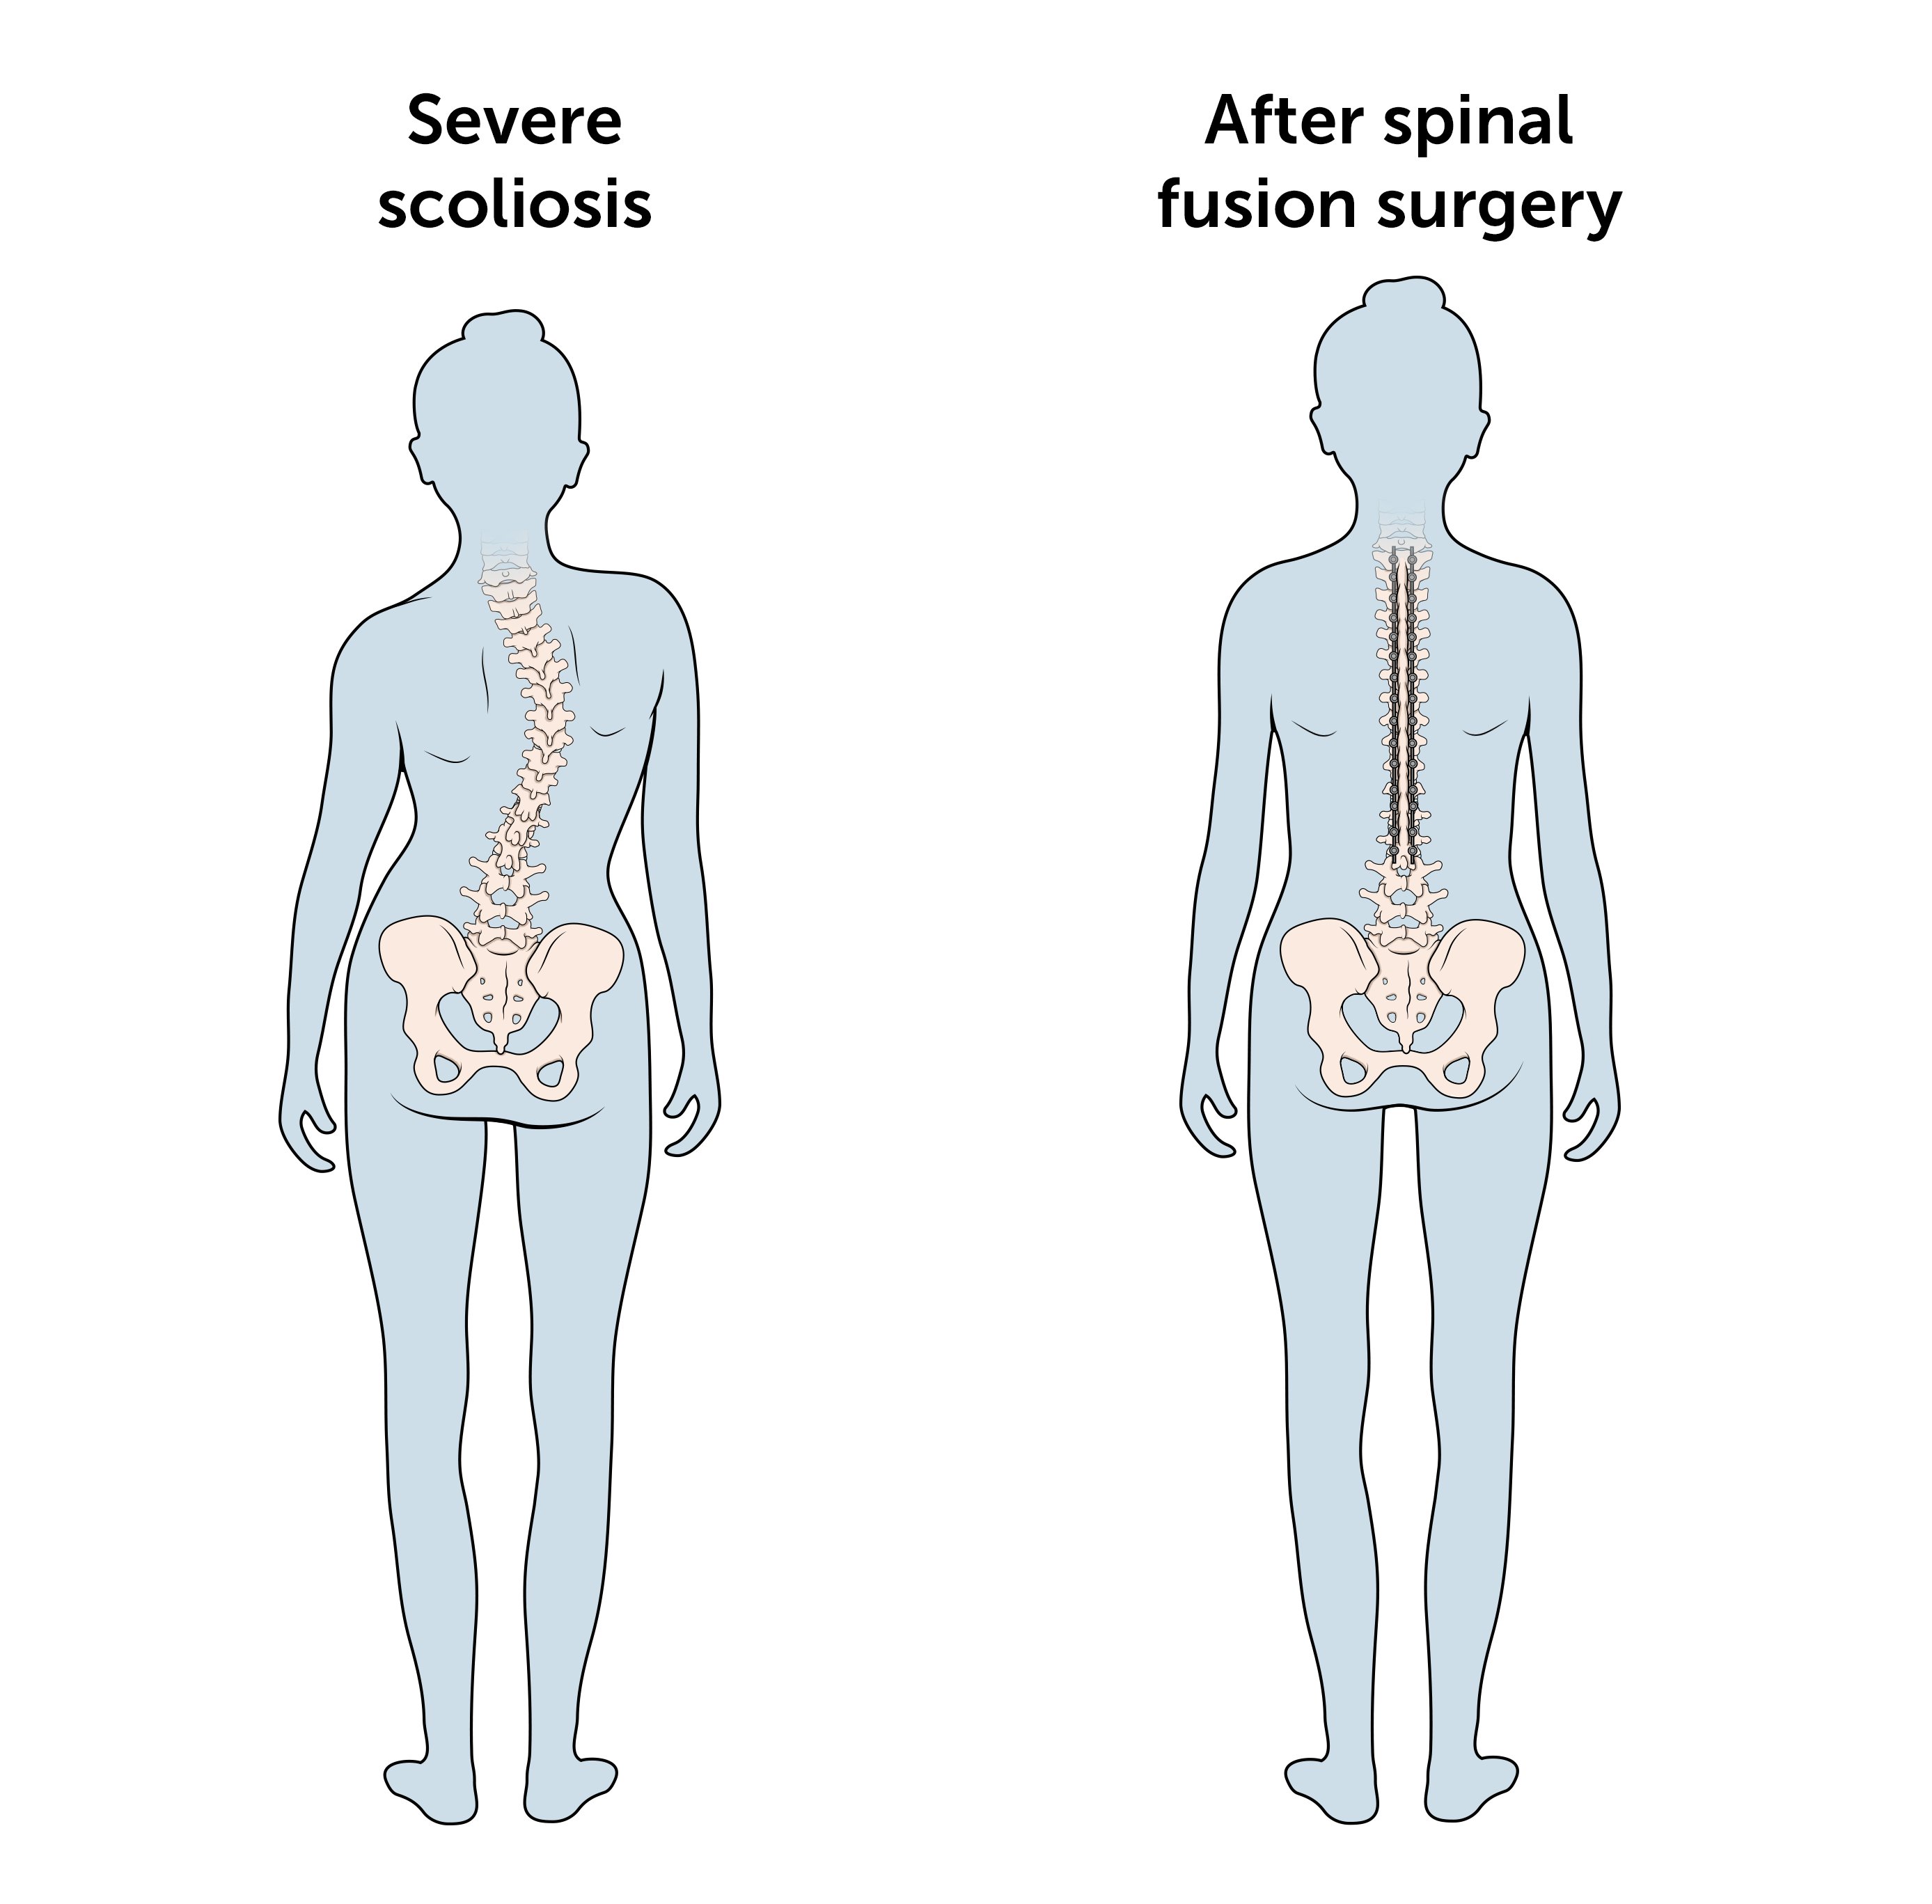 Illustration of patient with severe scoliosis before and after spinal fusion surgery. 